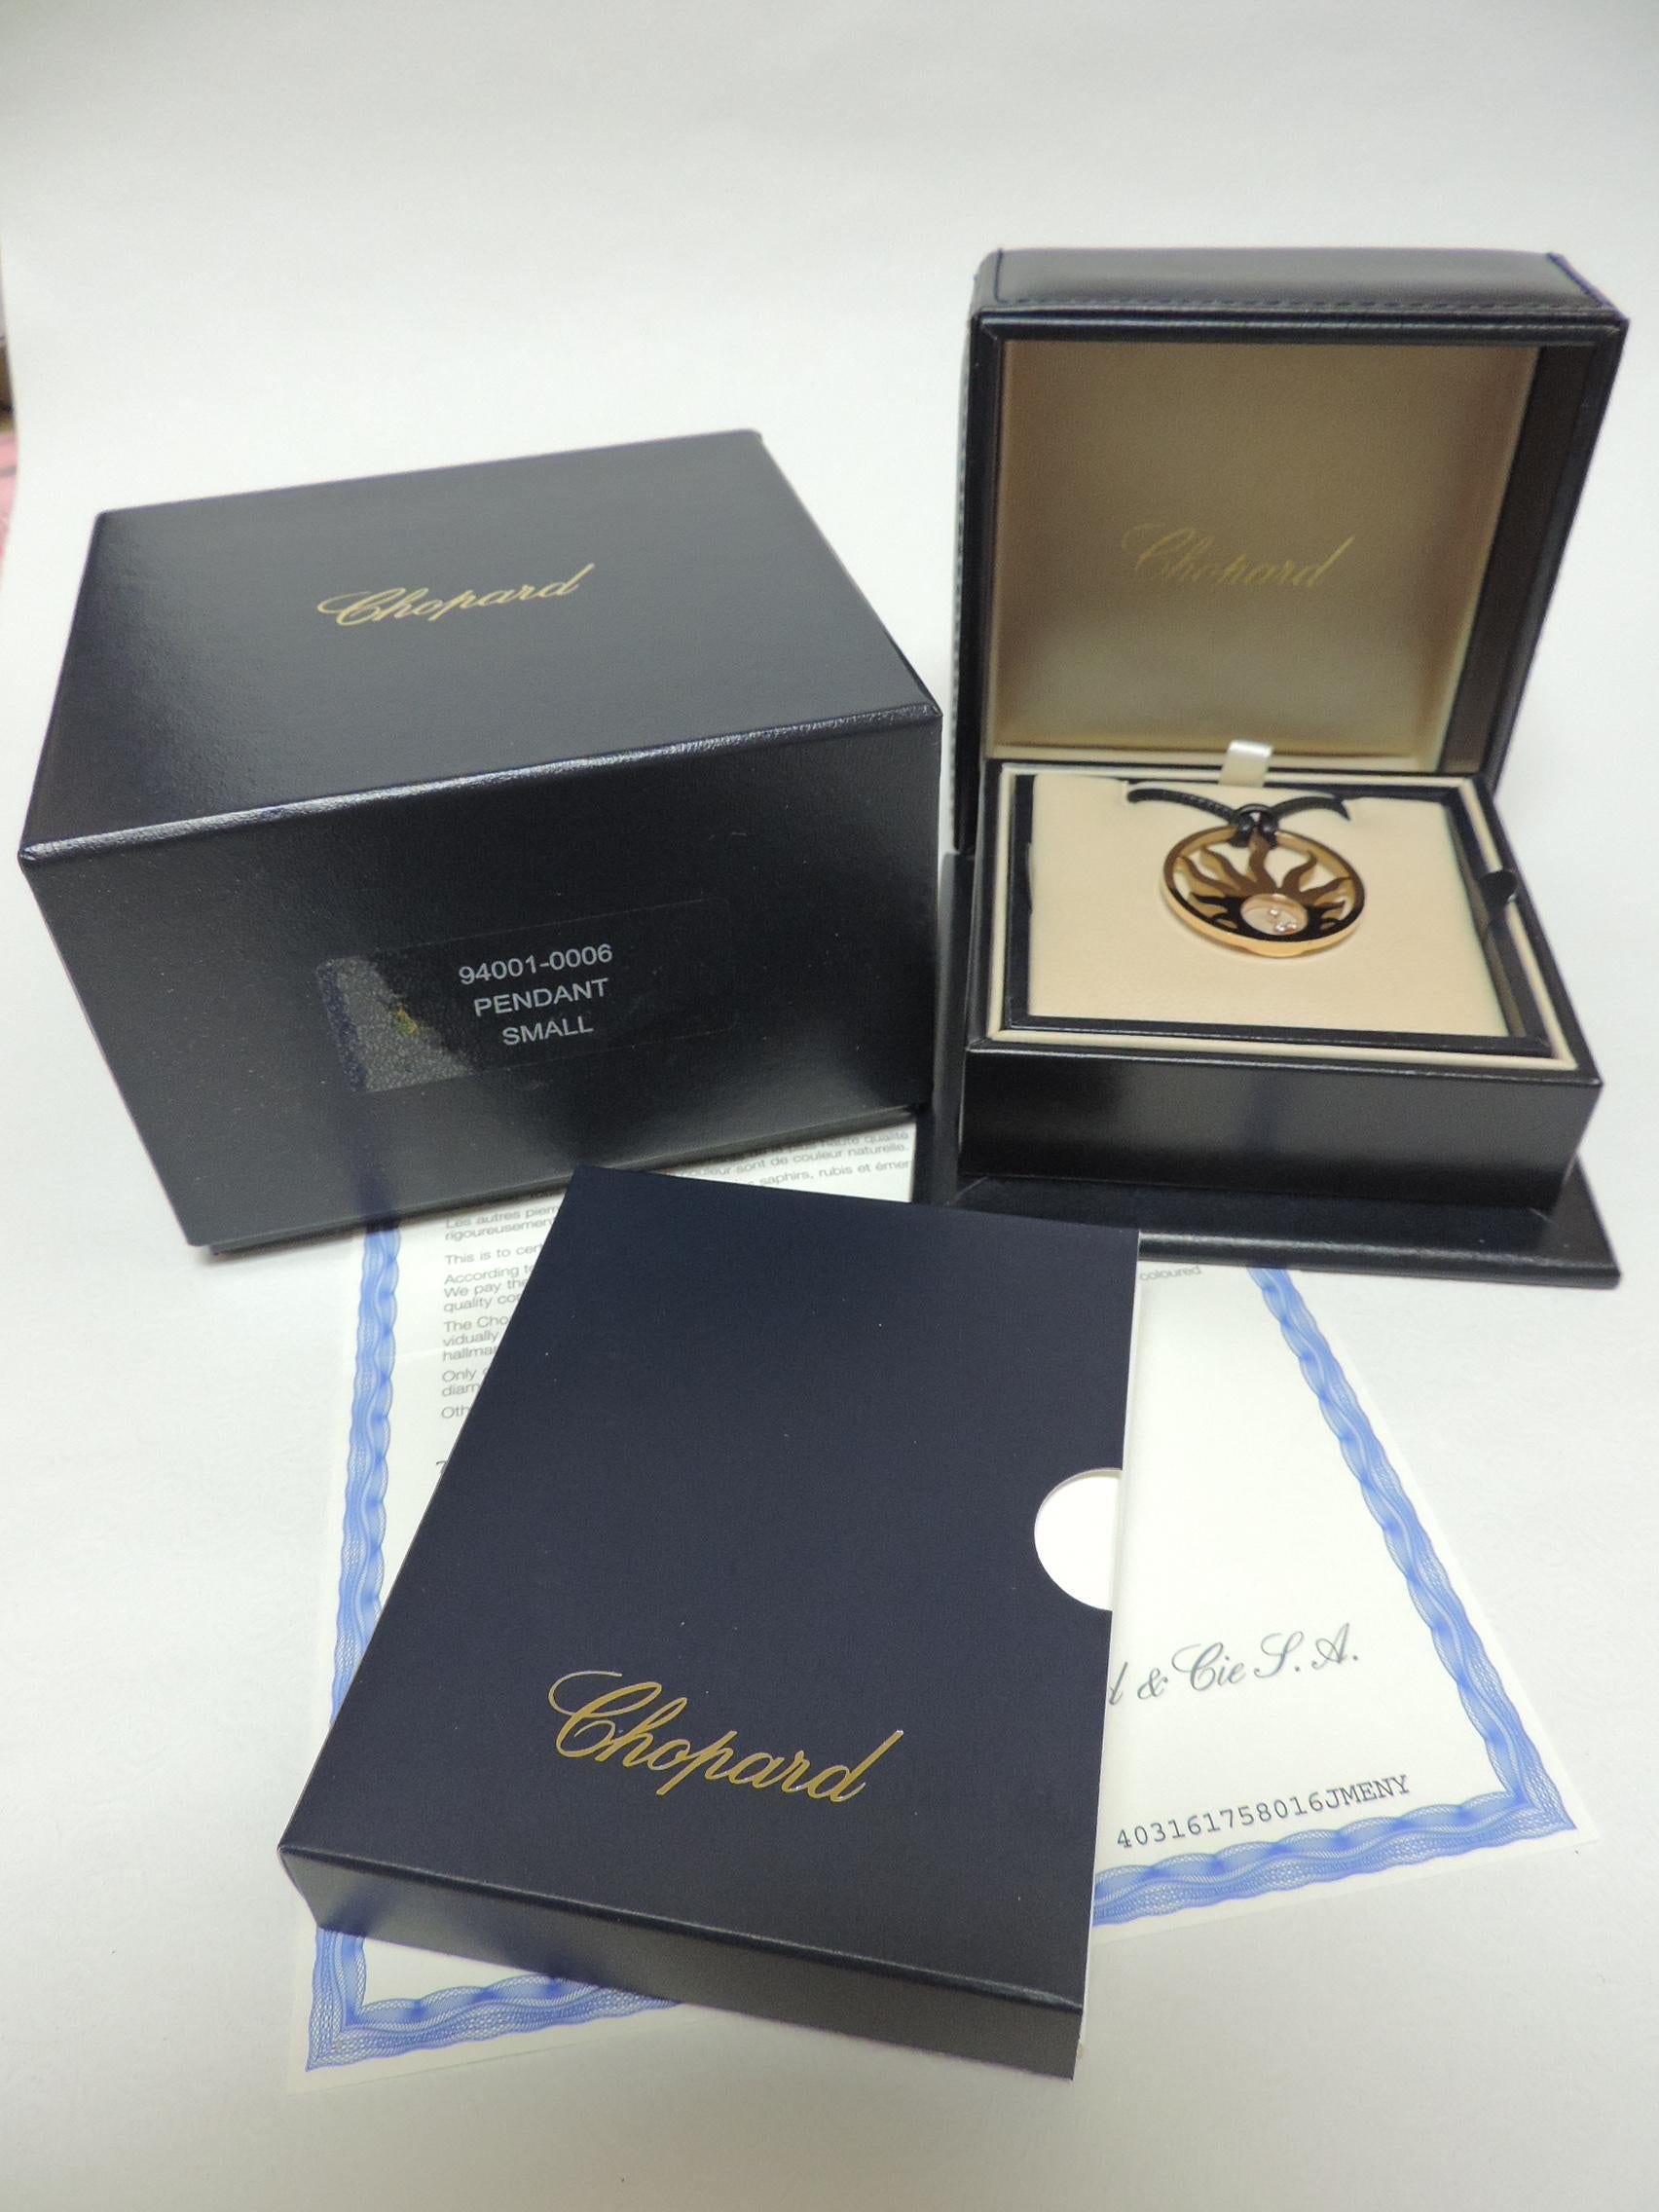 New Authentic CHOPARD Black Leather Pendant Small Box 94001-0006 